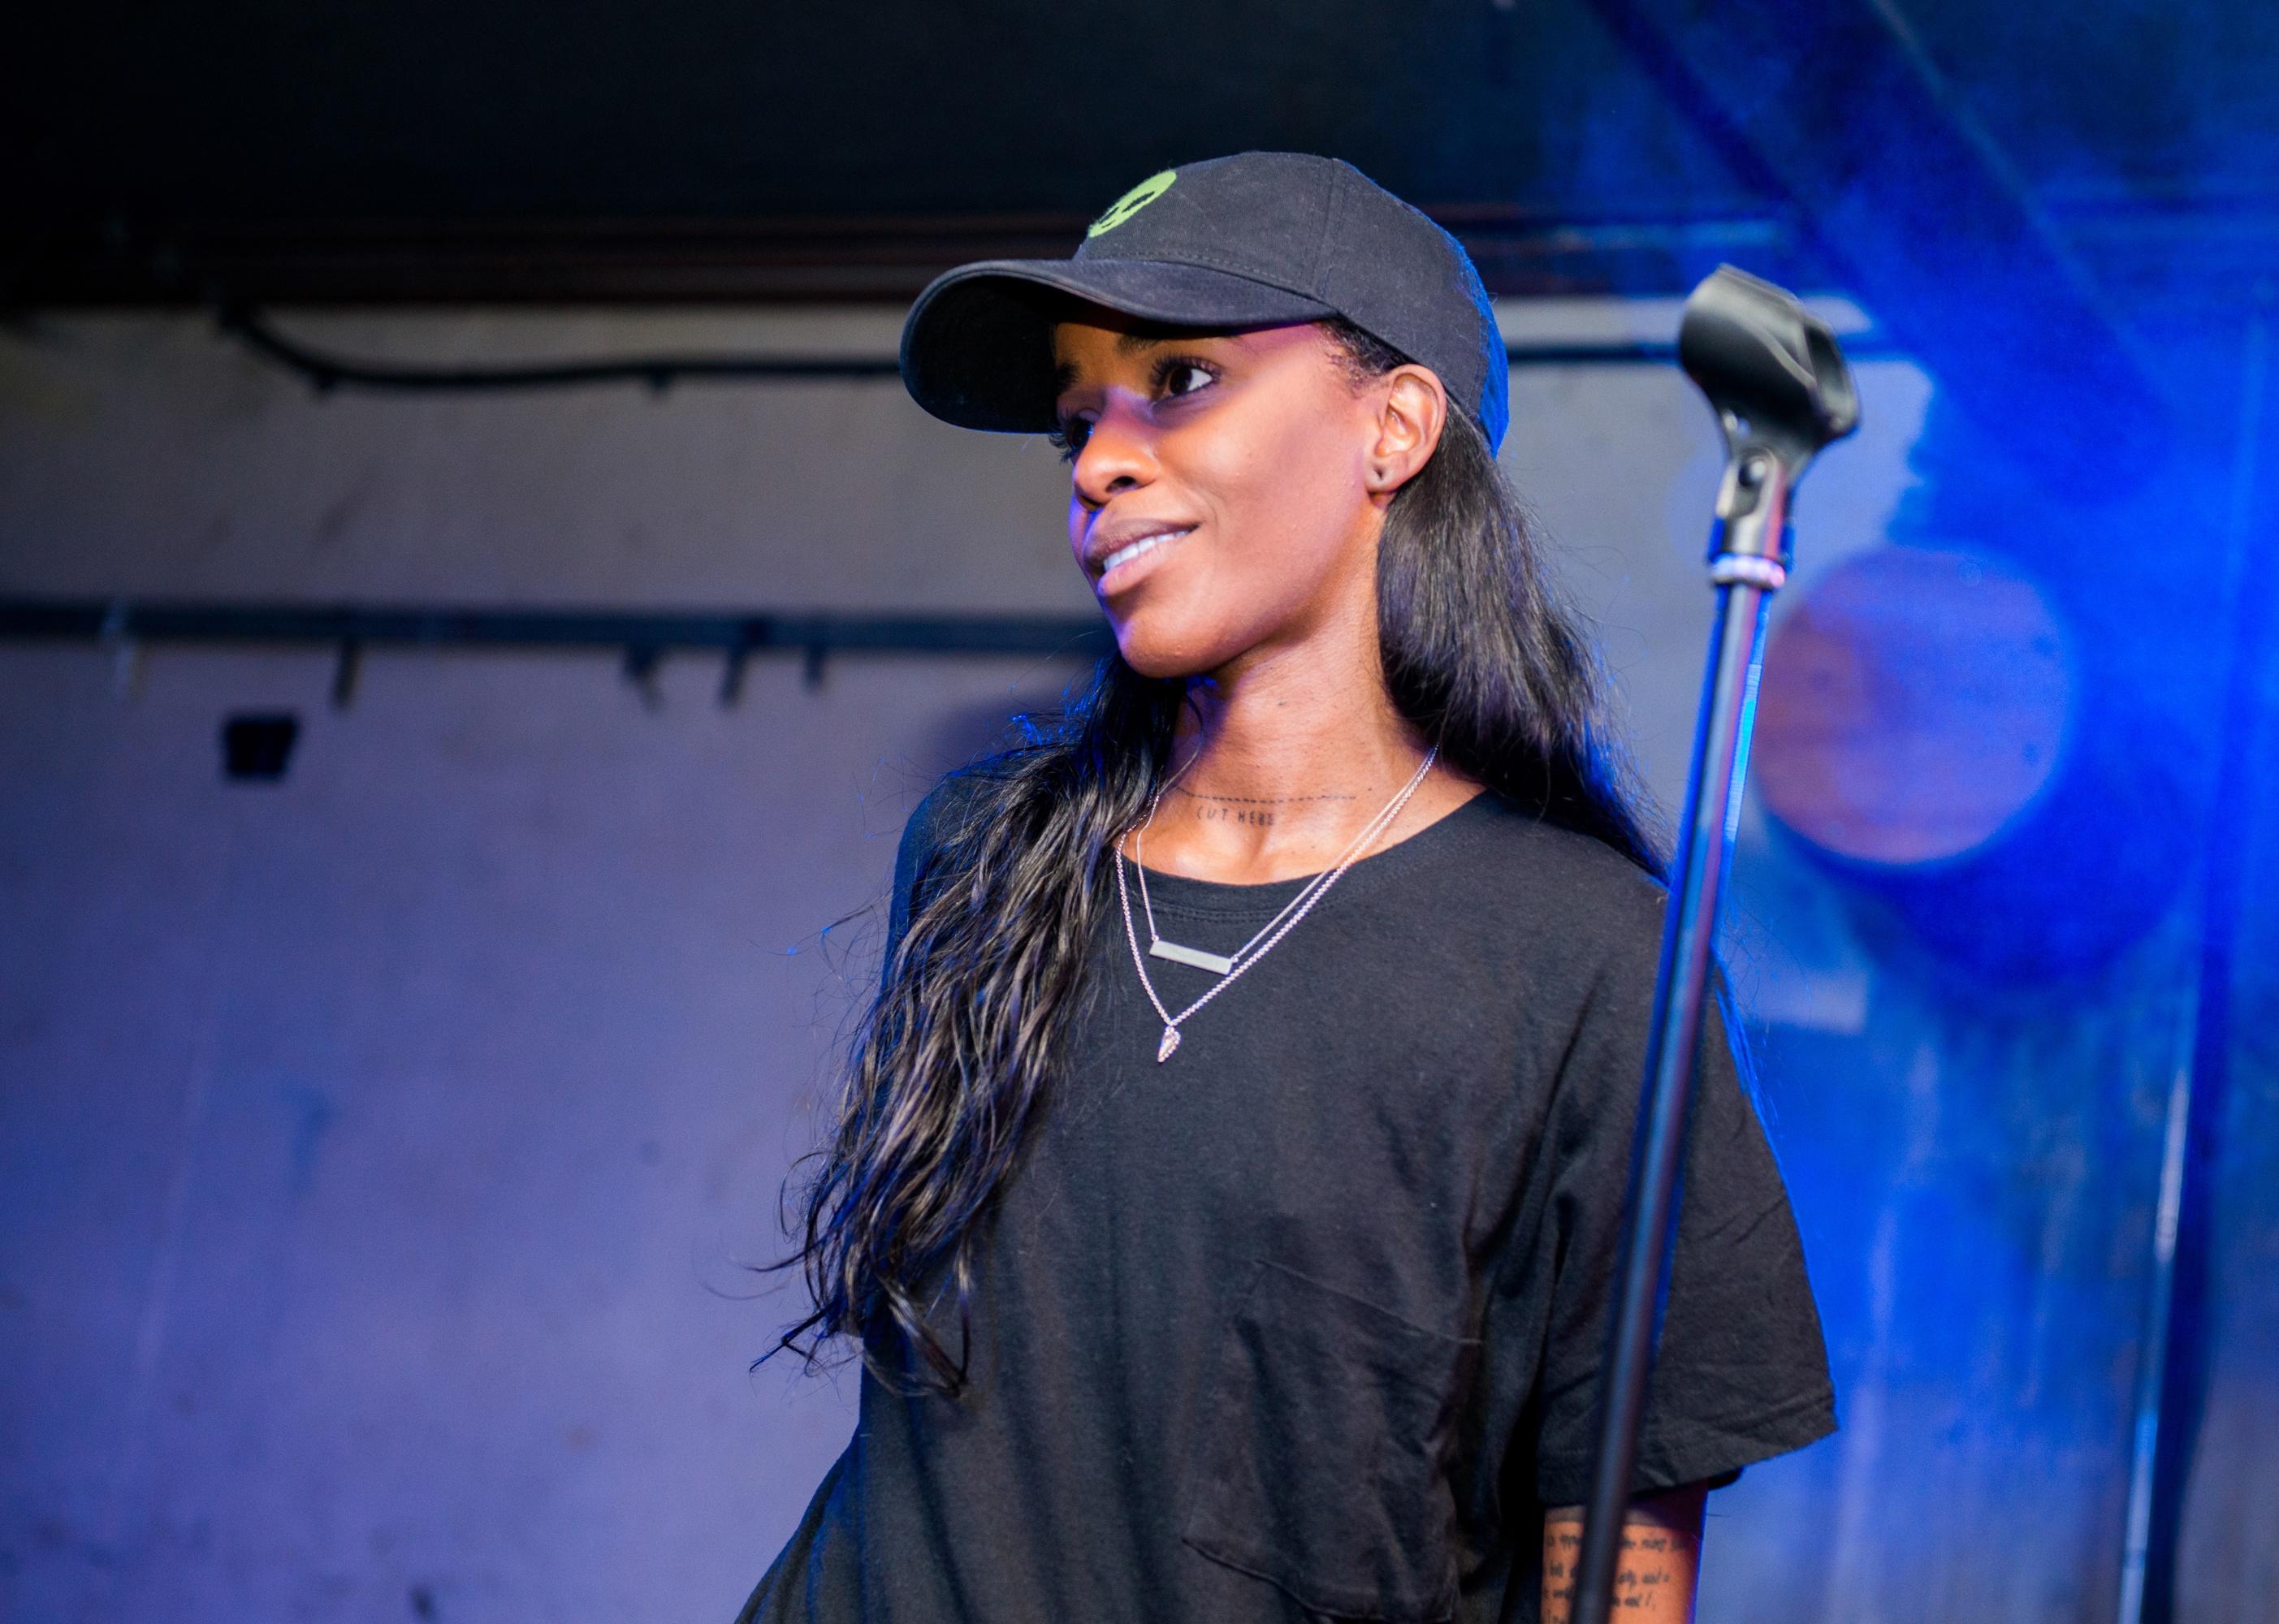 Angel Haze at The Laundry in London, England